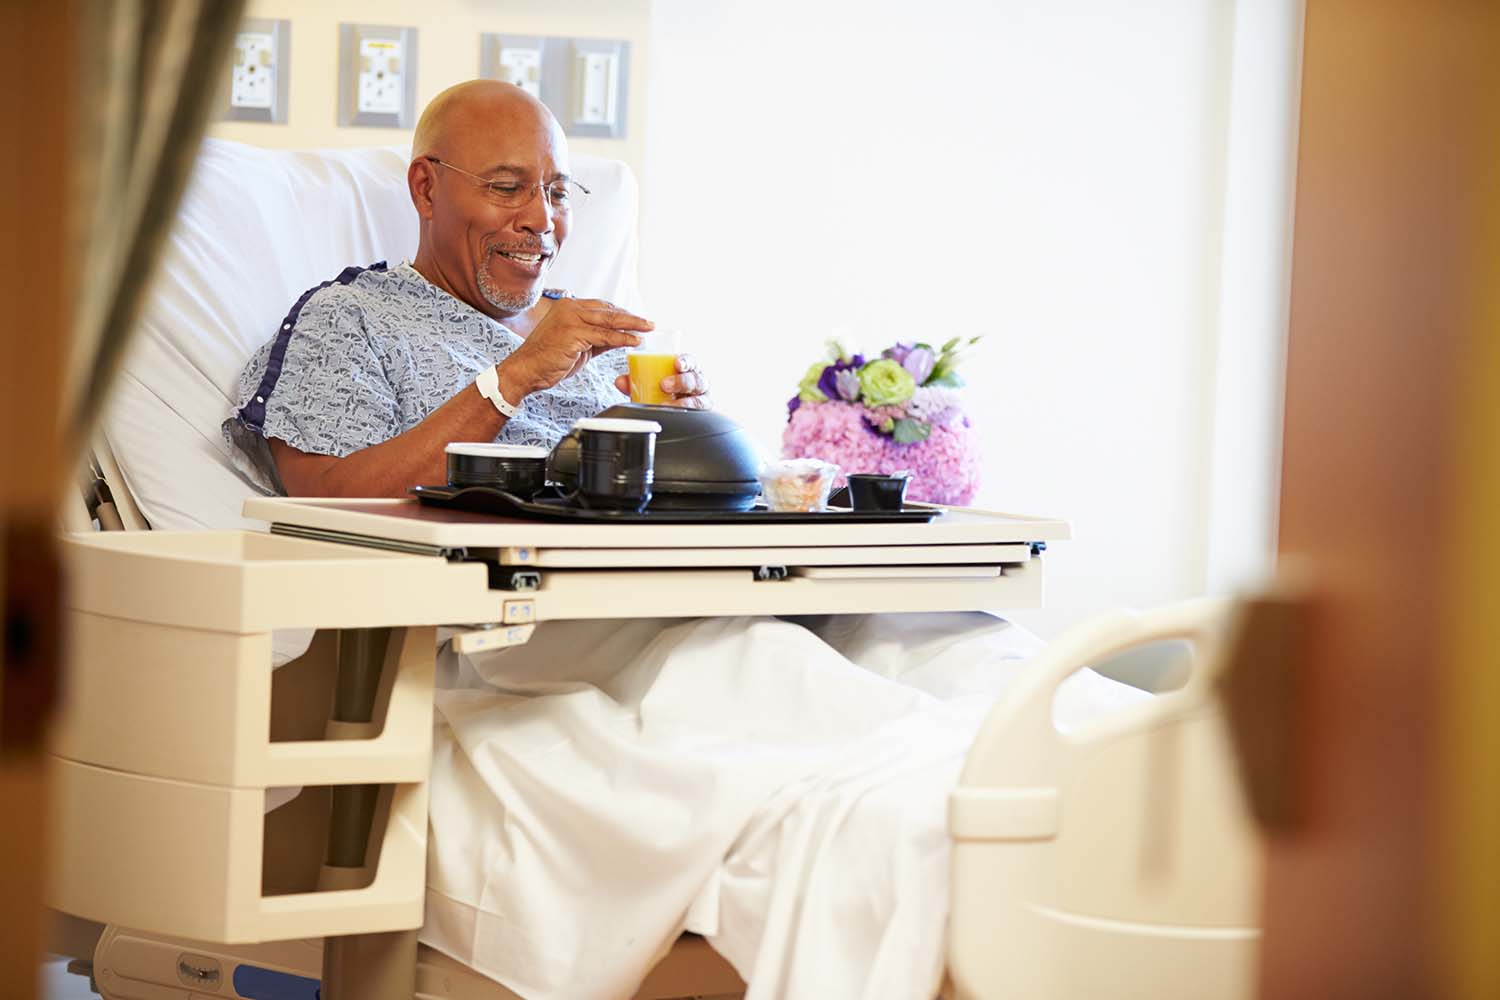 A man sits up in a hospital bed with a tray of food across his lap.